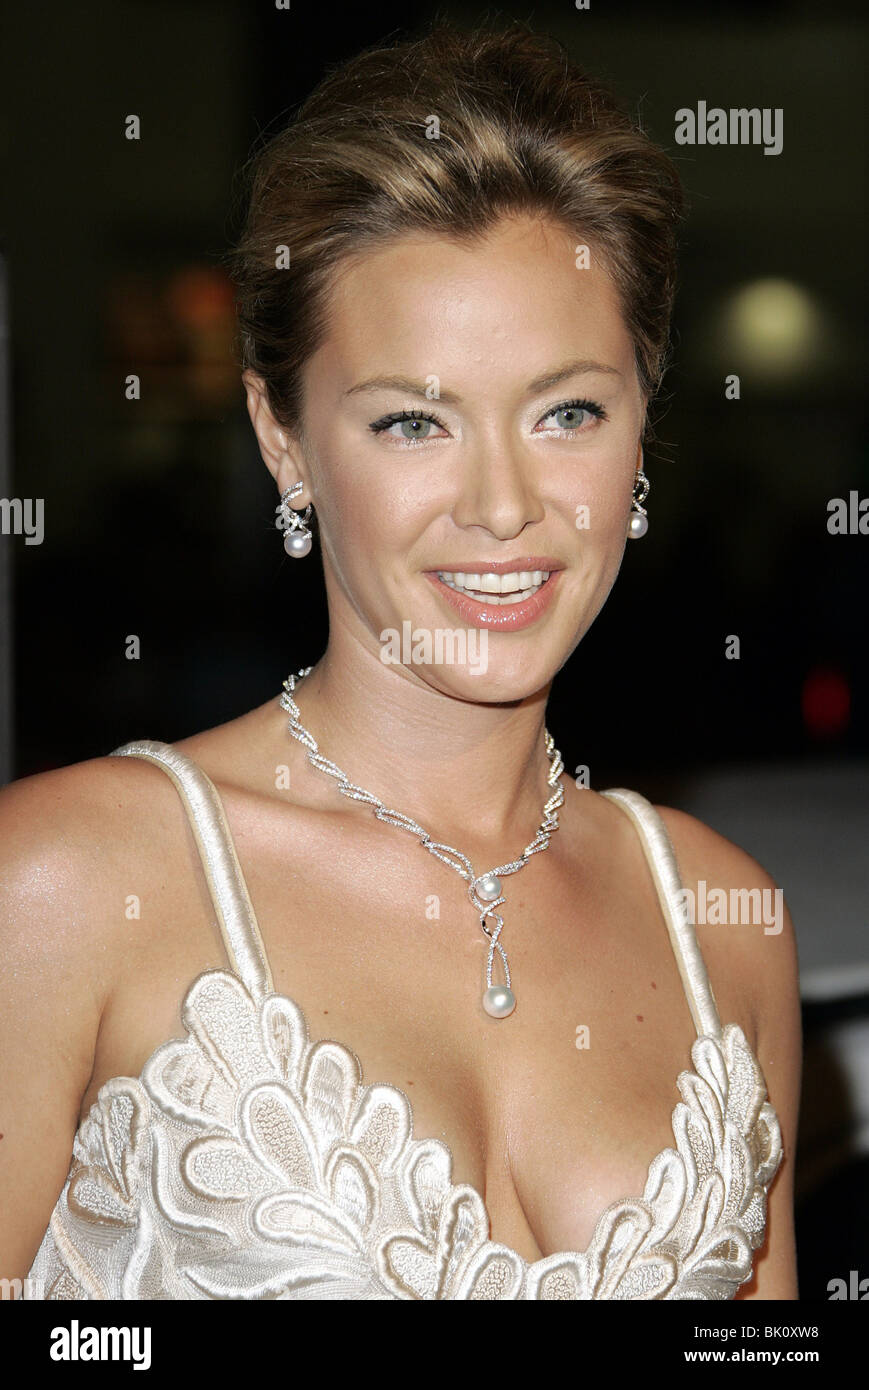 KRISTANNA LOKEN BLOODRAYNE PREMIERE CHINESE THEATRE HOLLYWOOD LOS ANGELES USA 04 January 2006 Stock Photo